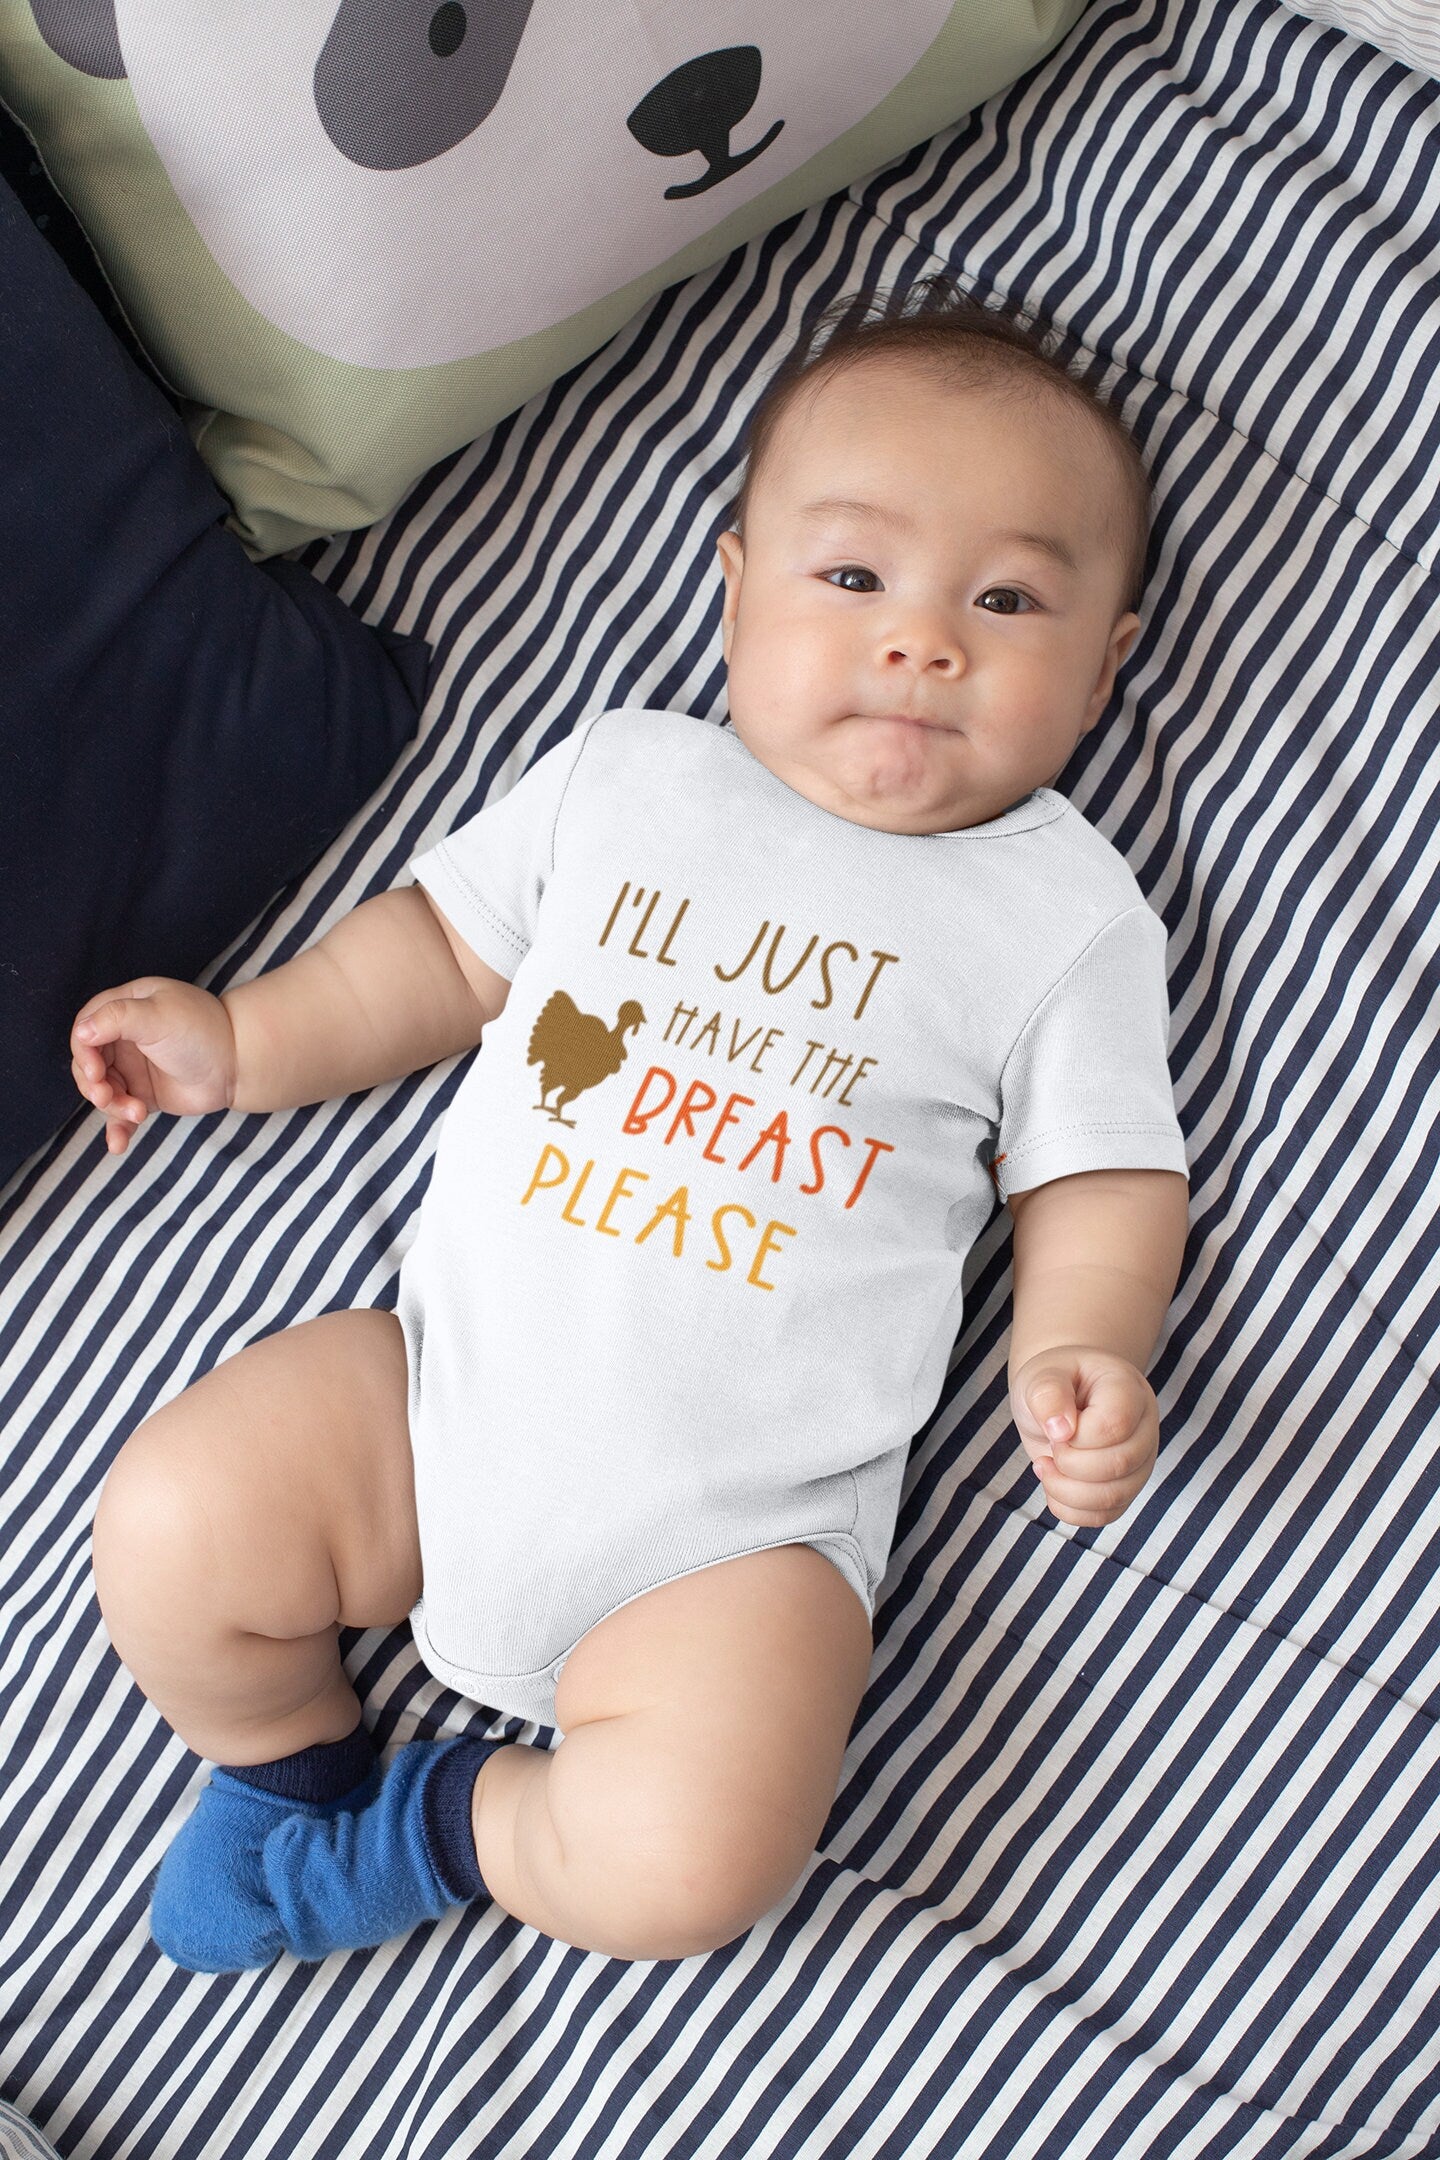 I'll Just Have The Breast Please, Thanksgiving Bodysuit, Breastfeeding Bodysuit, Turkey, Funny Baby Outfit, Fall Bodysuit, Unisex Outfit